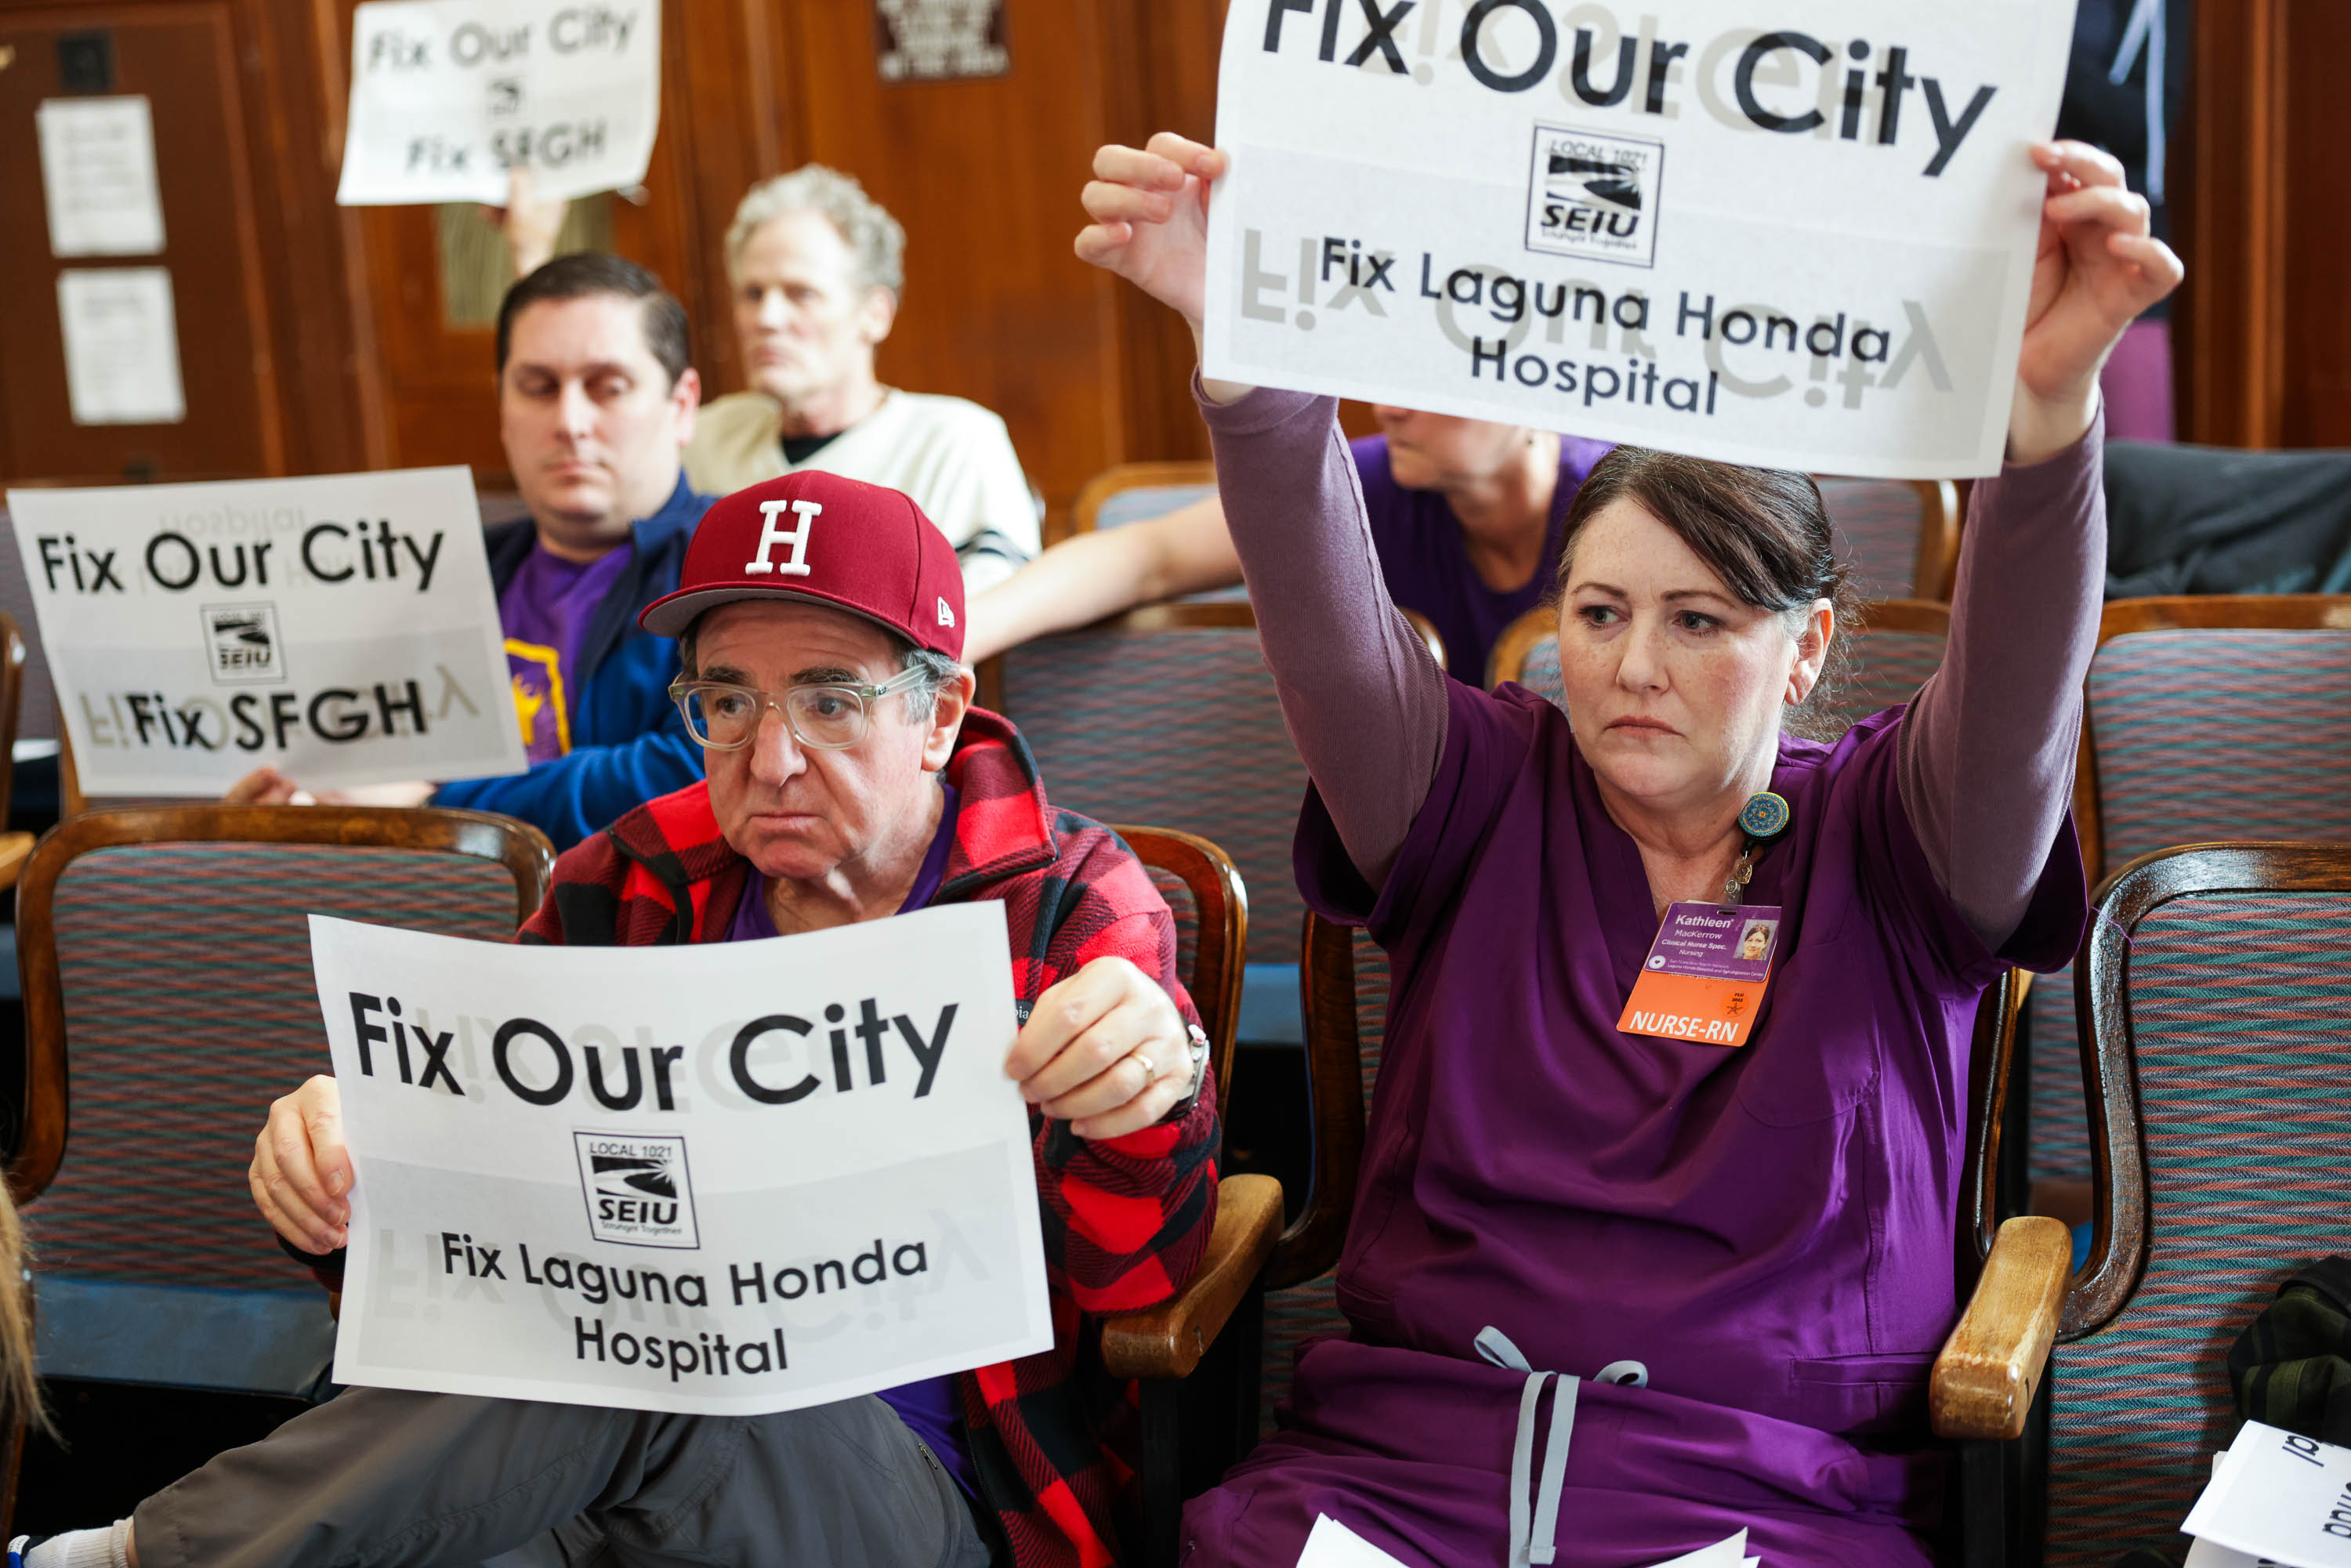 A group of people in a room hold signs saying &quot;Fix our city, Fix Laguna Honda Hospital.&quot; They appear serious and are seated, some wearing work uniforms.